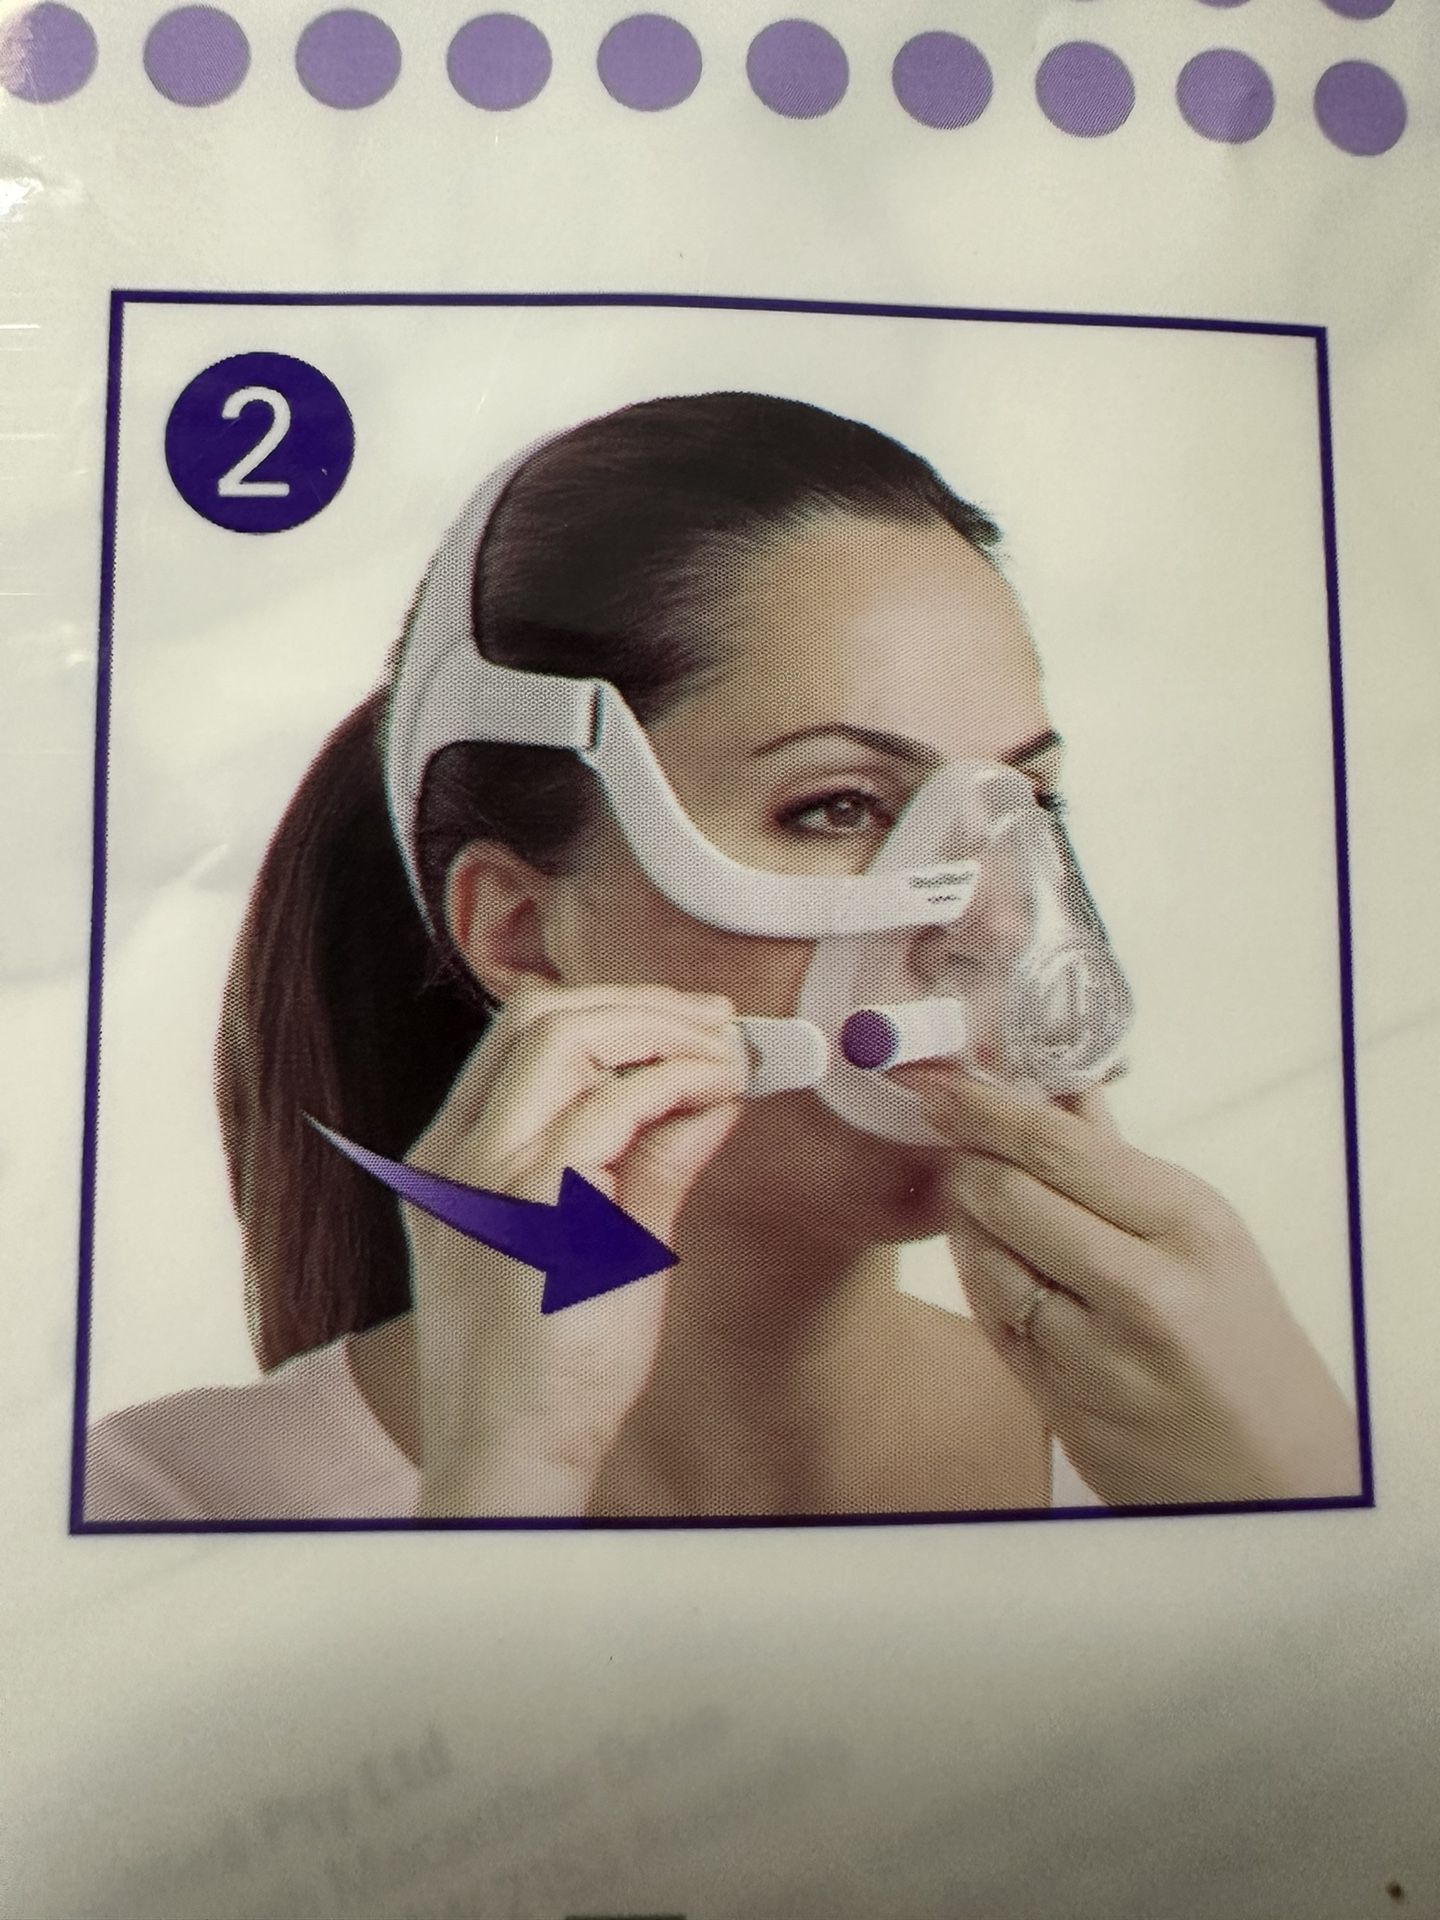 CPAP ResMed AirFitF20 Full Face Mask S REF63403